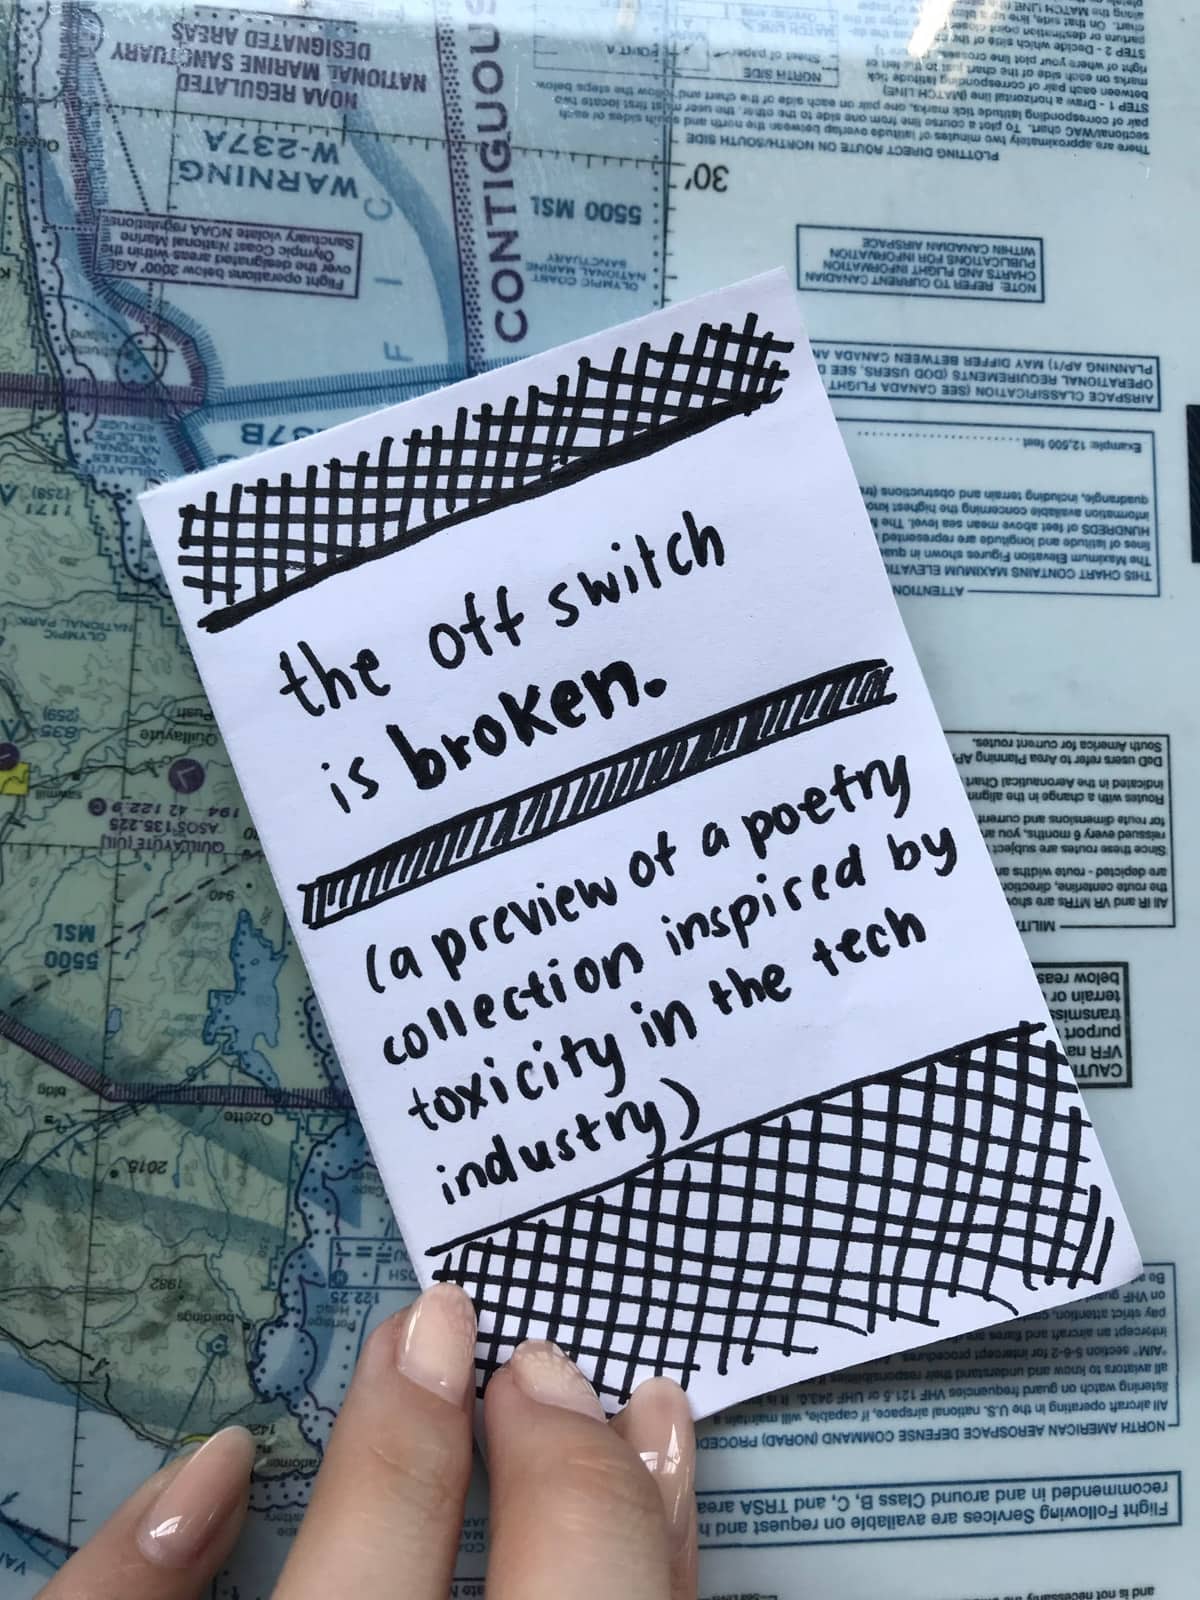 The cover of a small zine with the title “the off switch is broken” (a preview of a poetry collection inspired by toxicity in the tech industry)